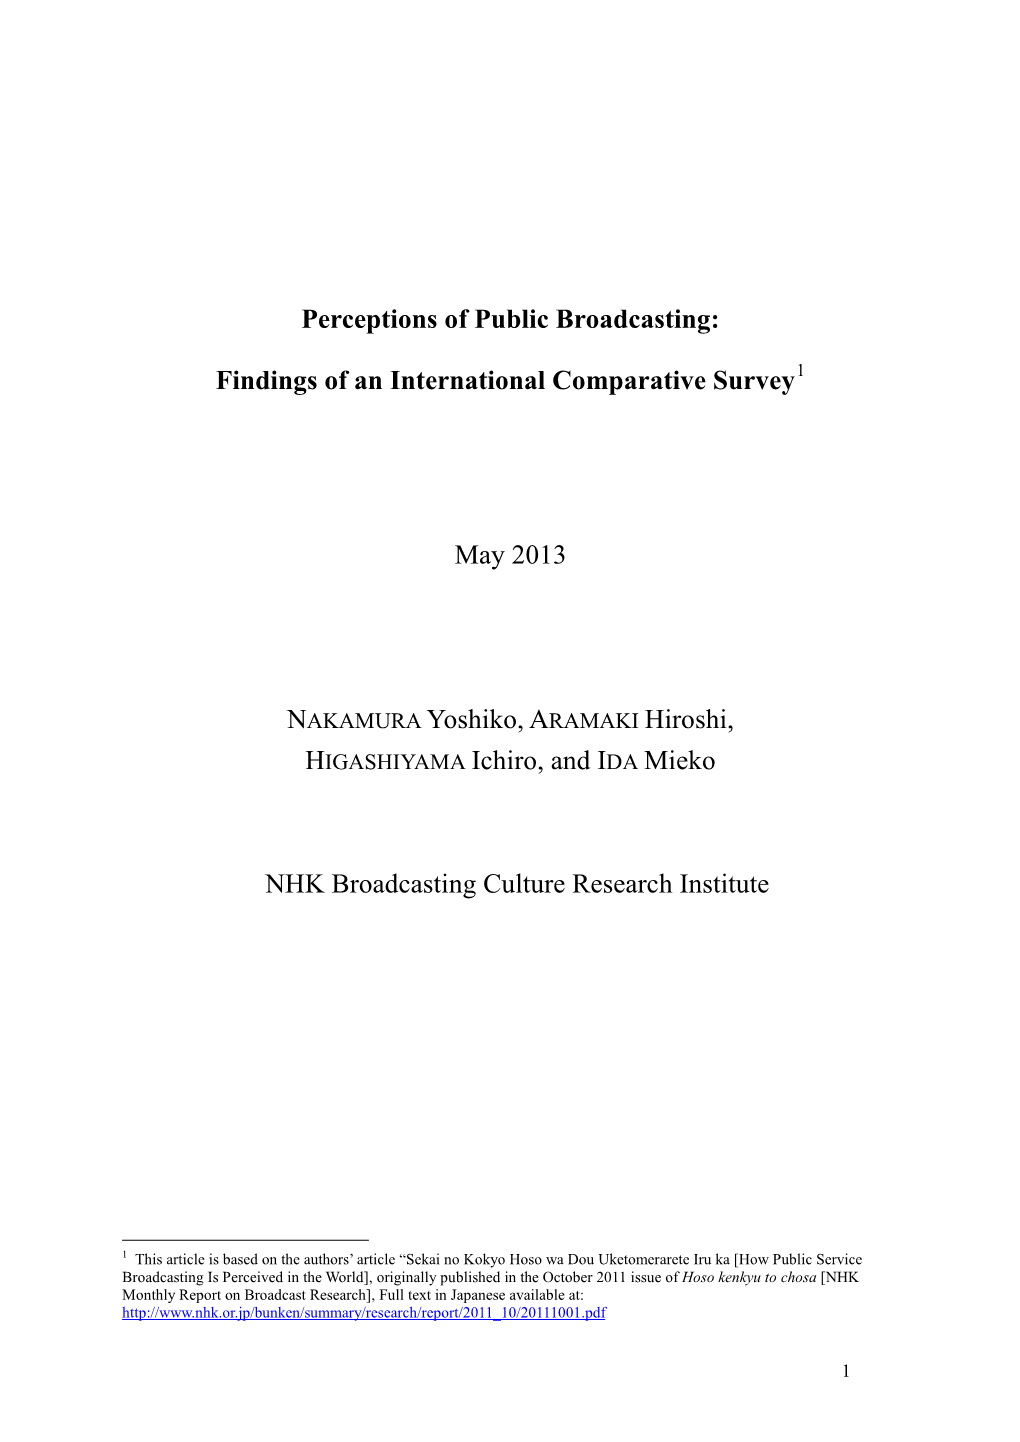 [Title on NHK Website: How Public Service Broadcasting Is Perceived in the World: from the 2011 Cross-National Survey of Public